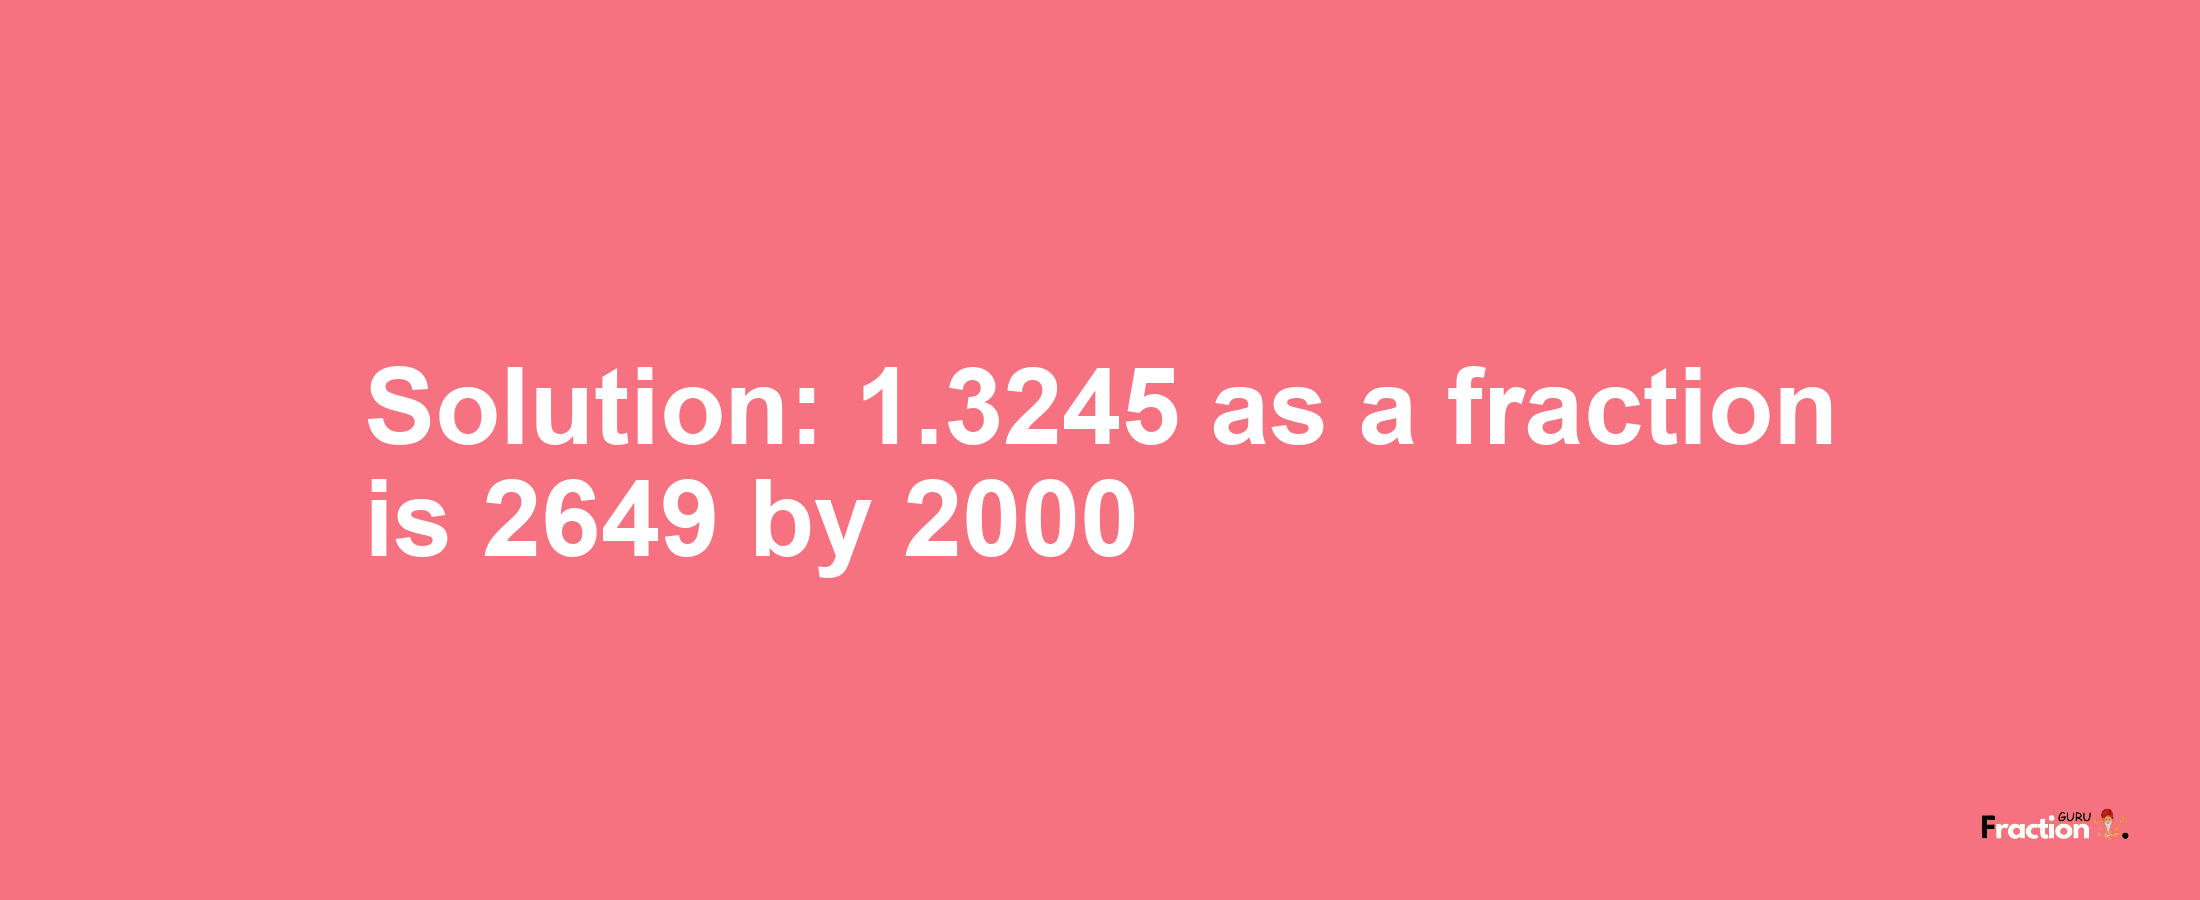 Solution:1.3245 as a fraction is 2649/2000